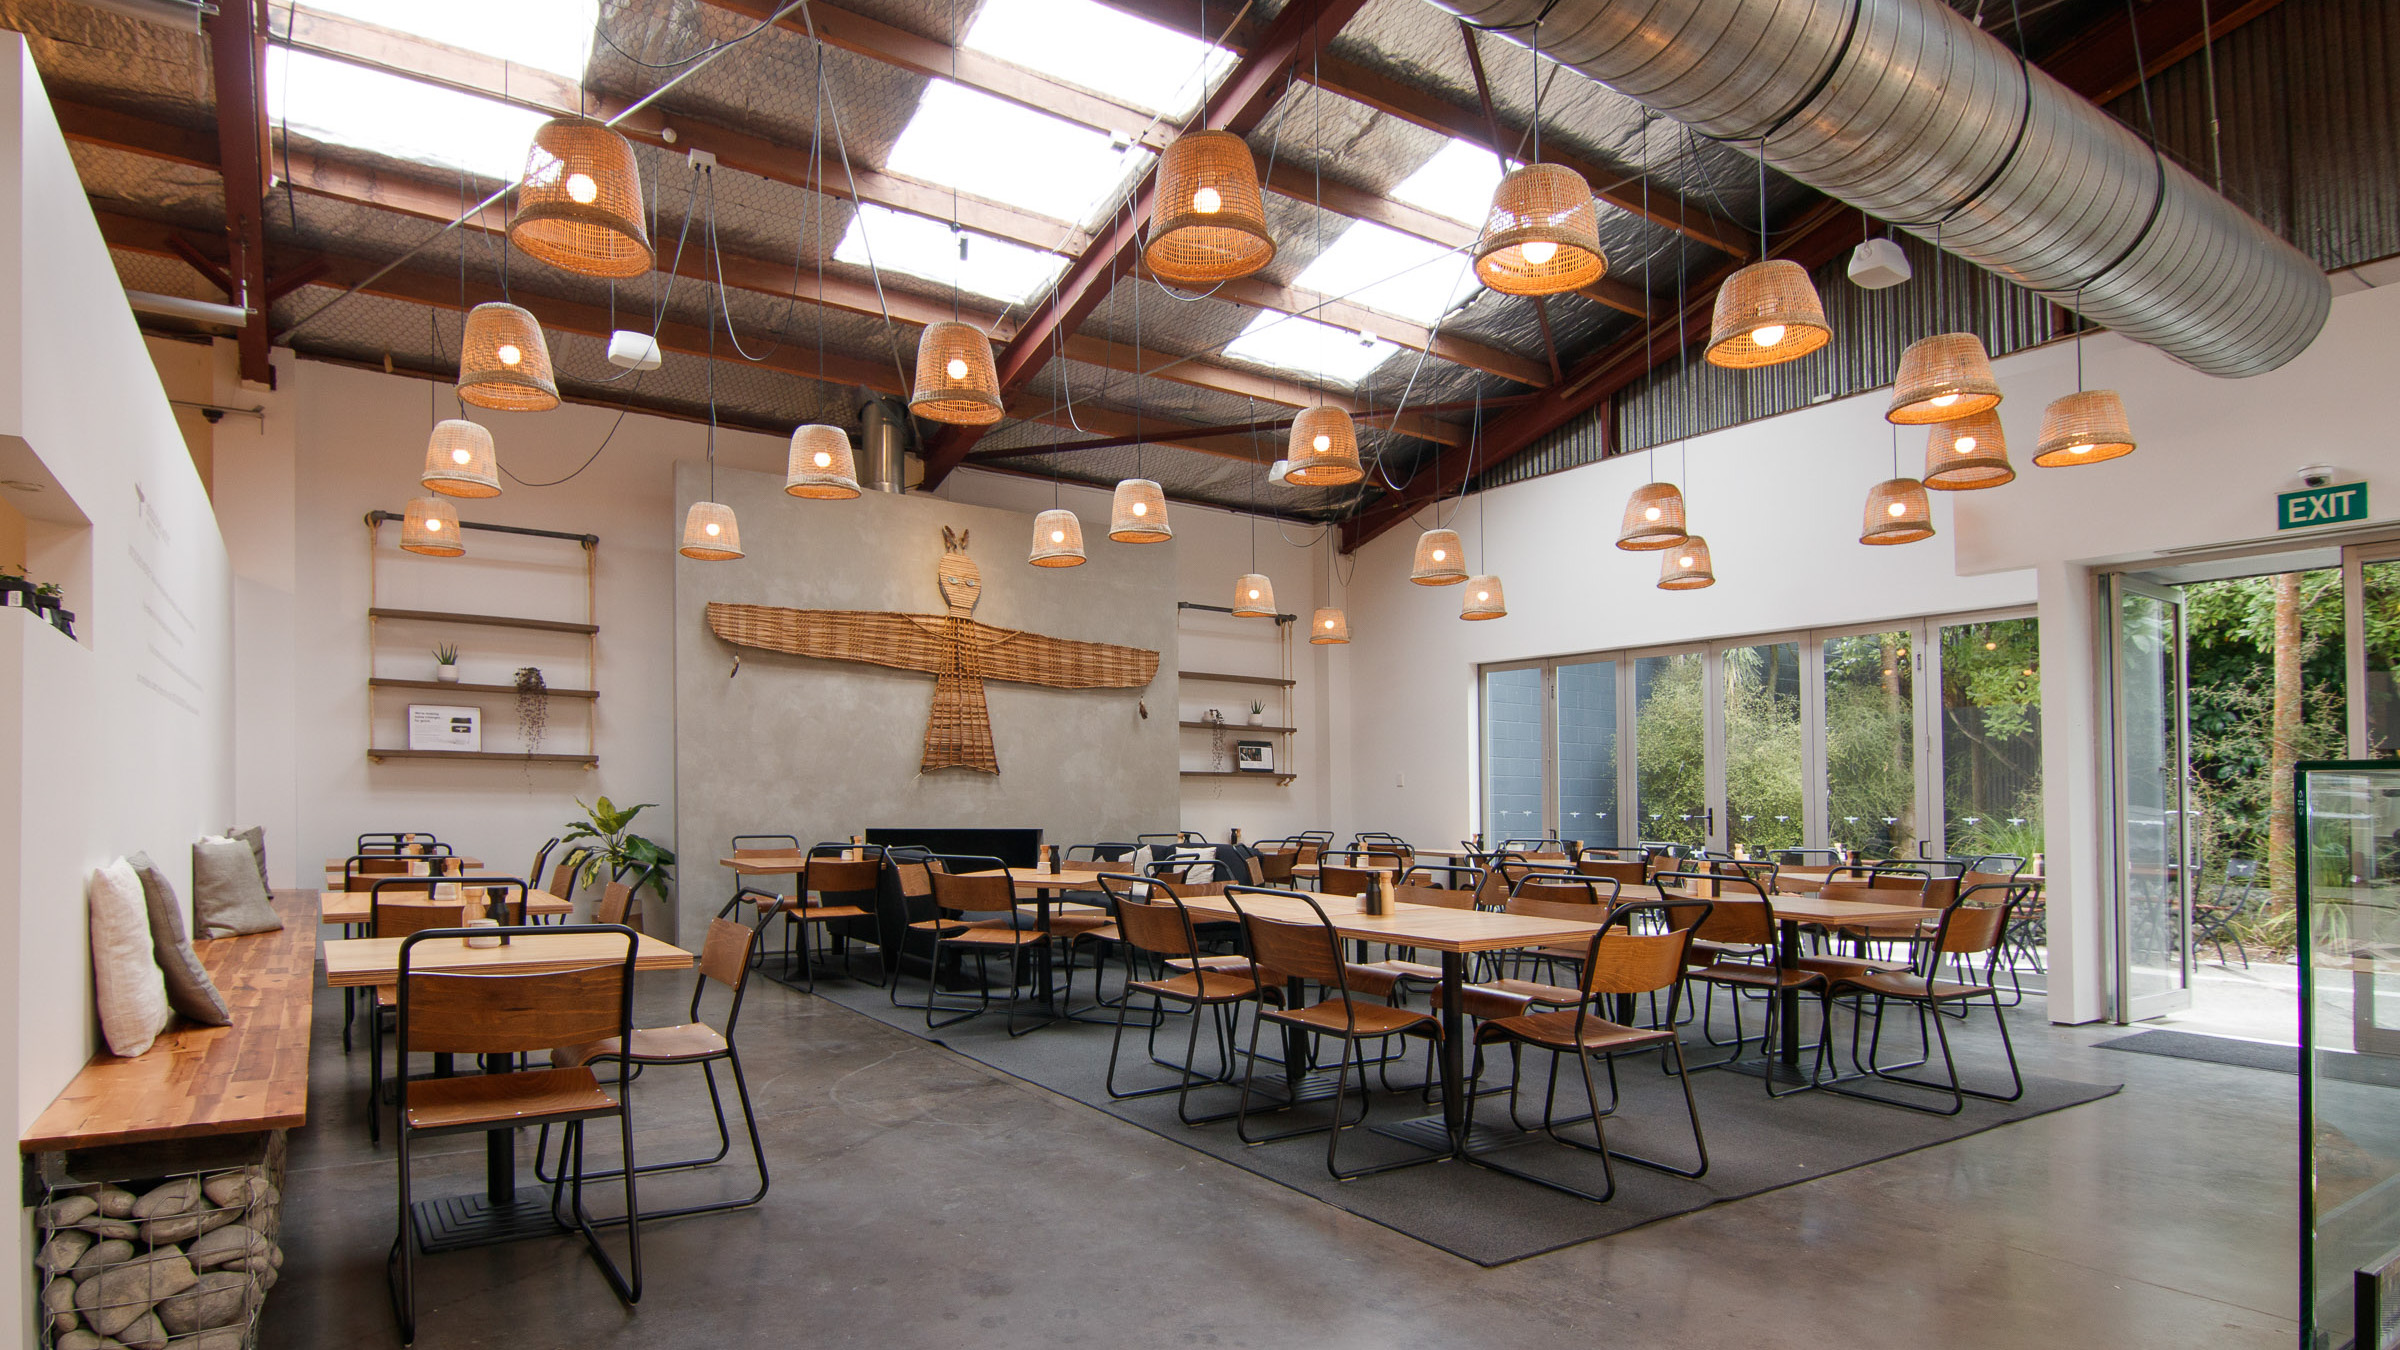 Cafe fitout Completed by Miller Creative in Christchurch